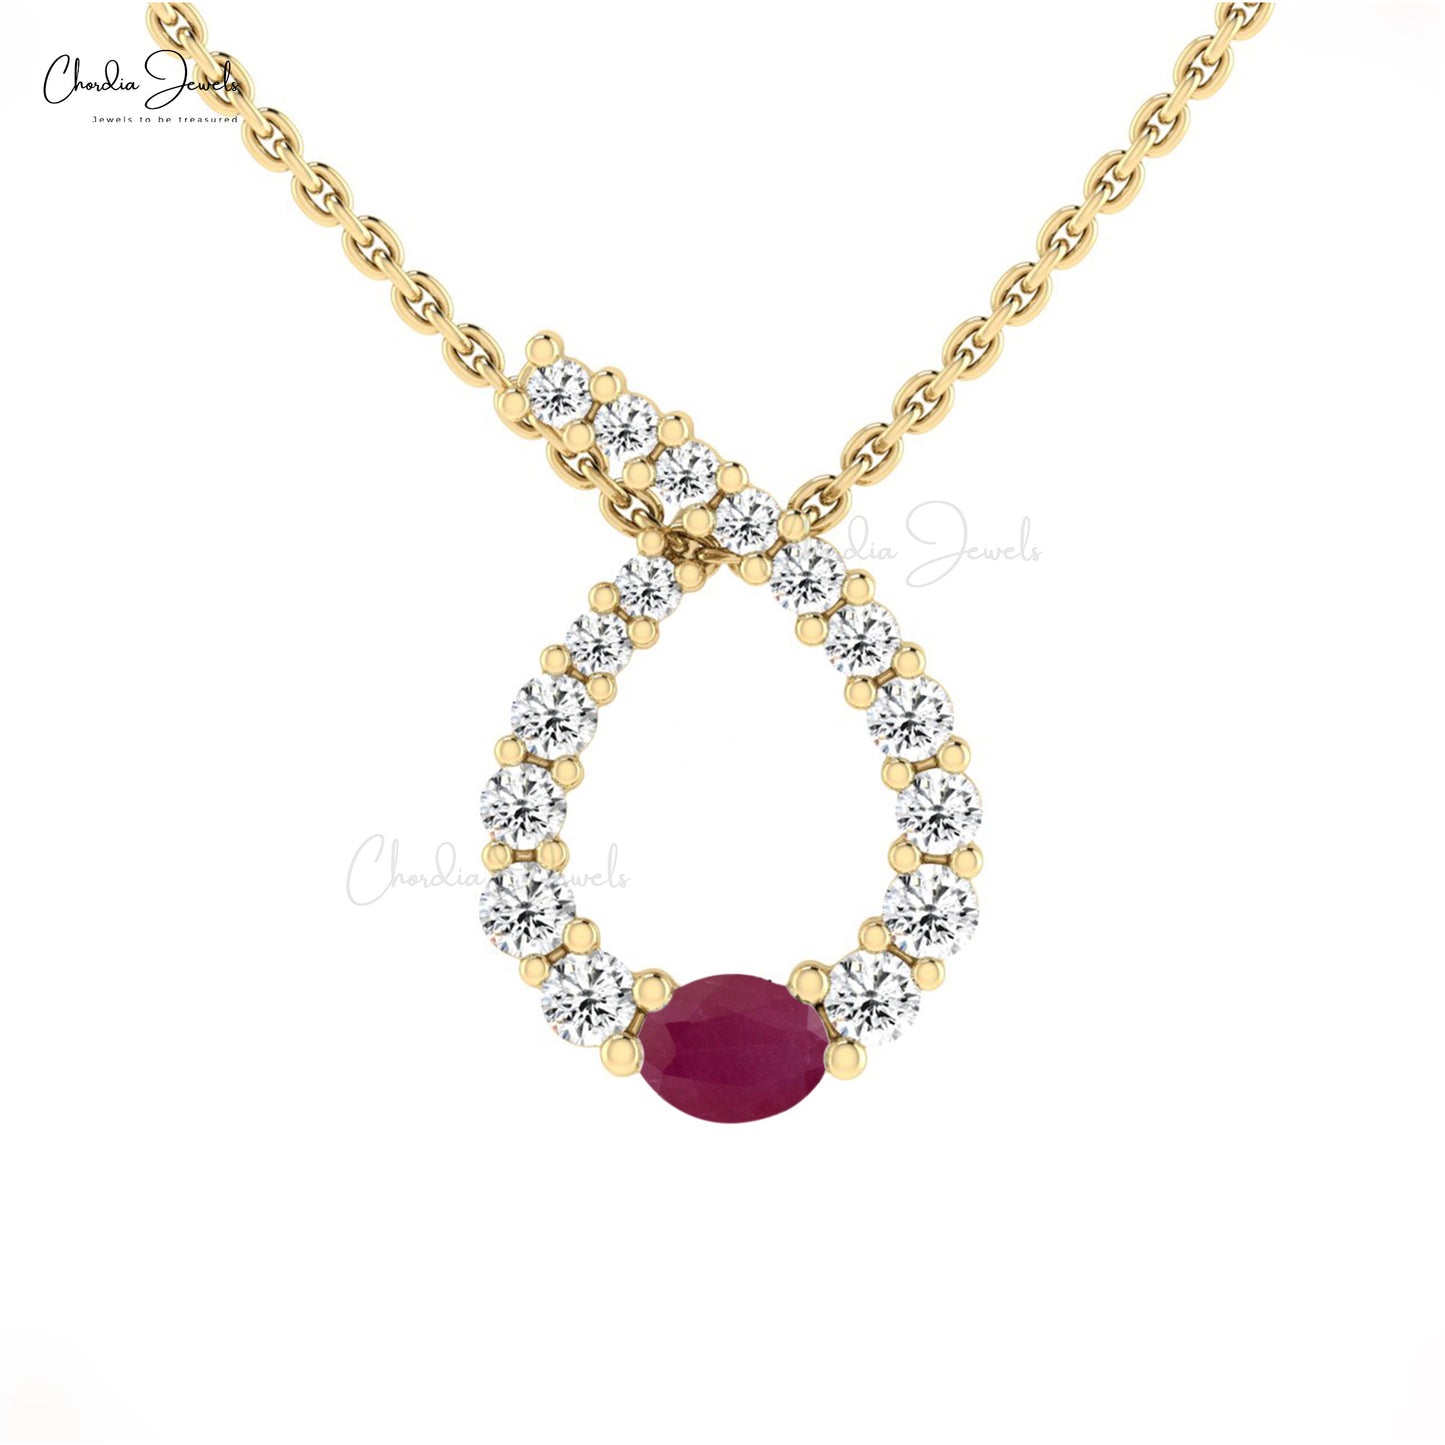 Natural Ruby 4X3mm Oval Cut Handmade Pendant 14k Solid Gold White Diamond Pendant For July Birthstone